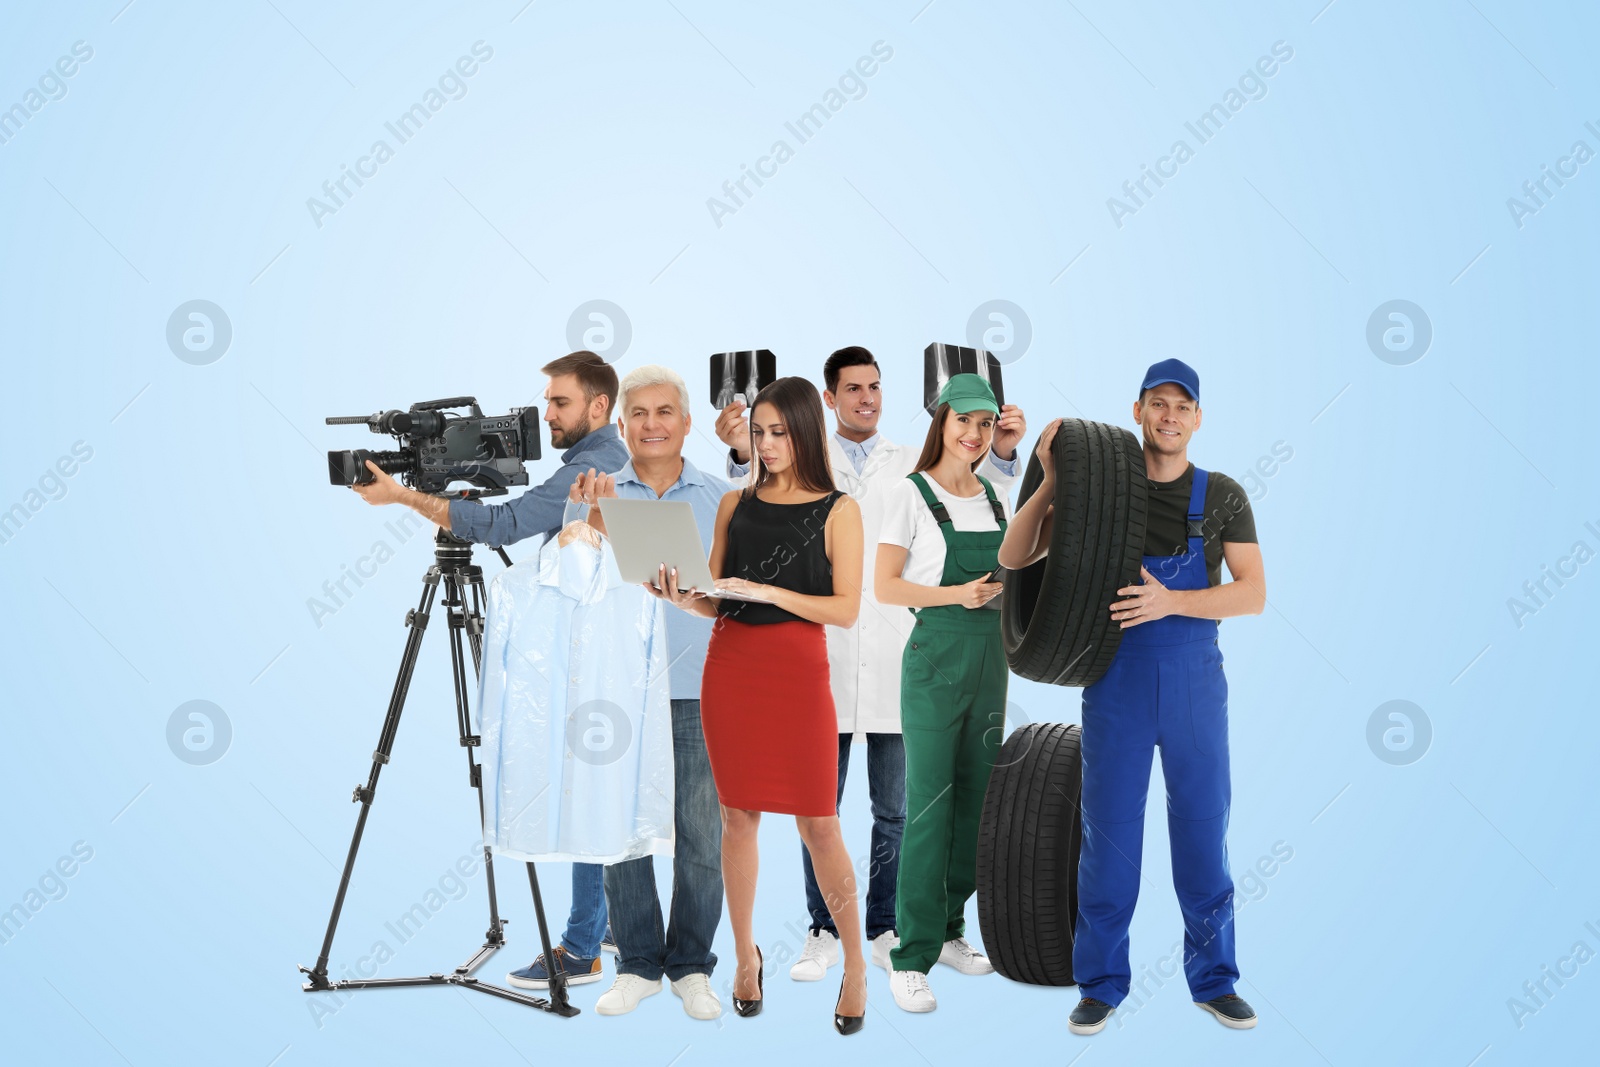 Image of Choosing profession. People of different occupations on light blue background